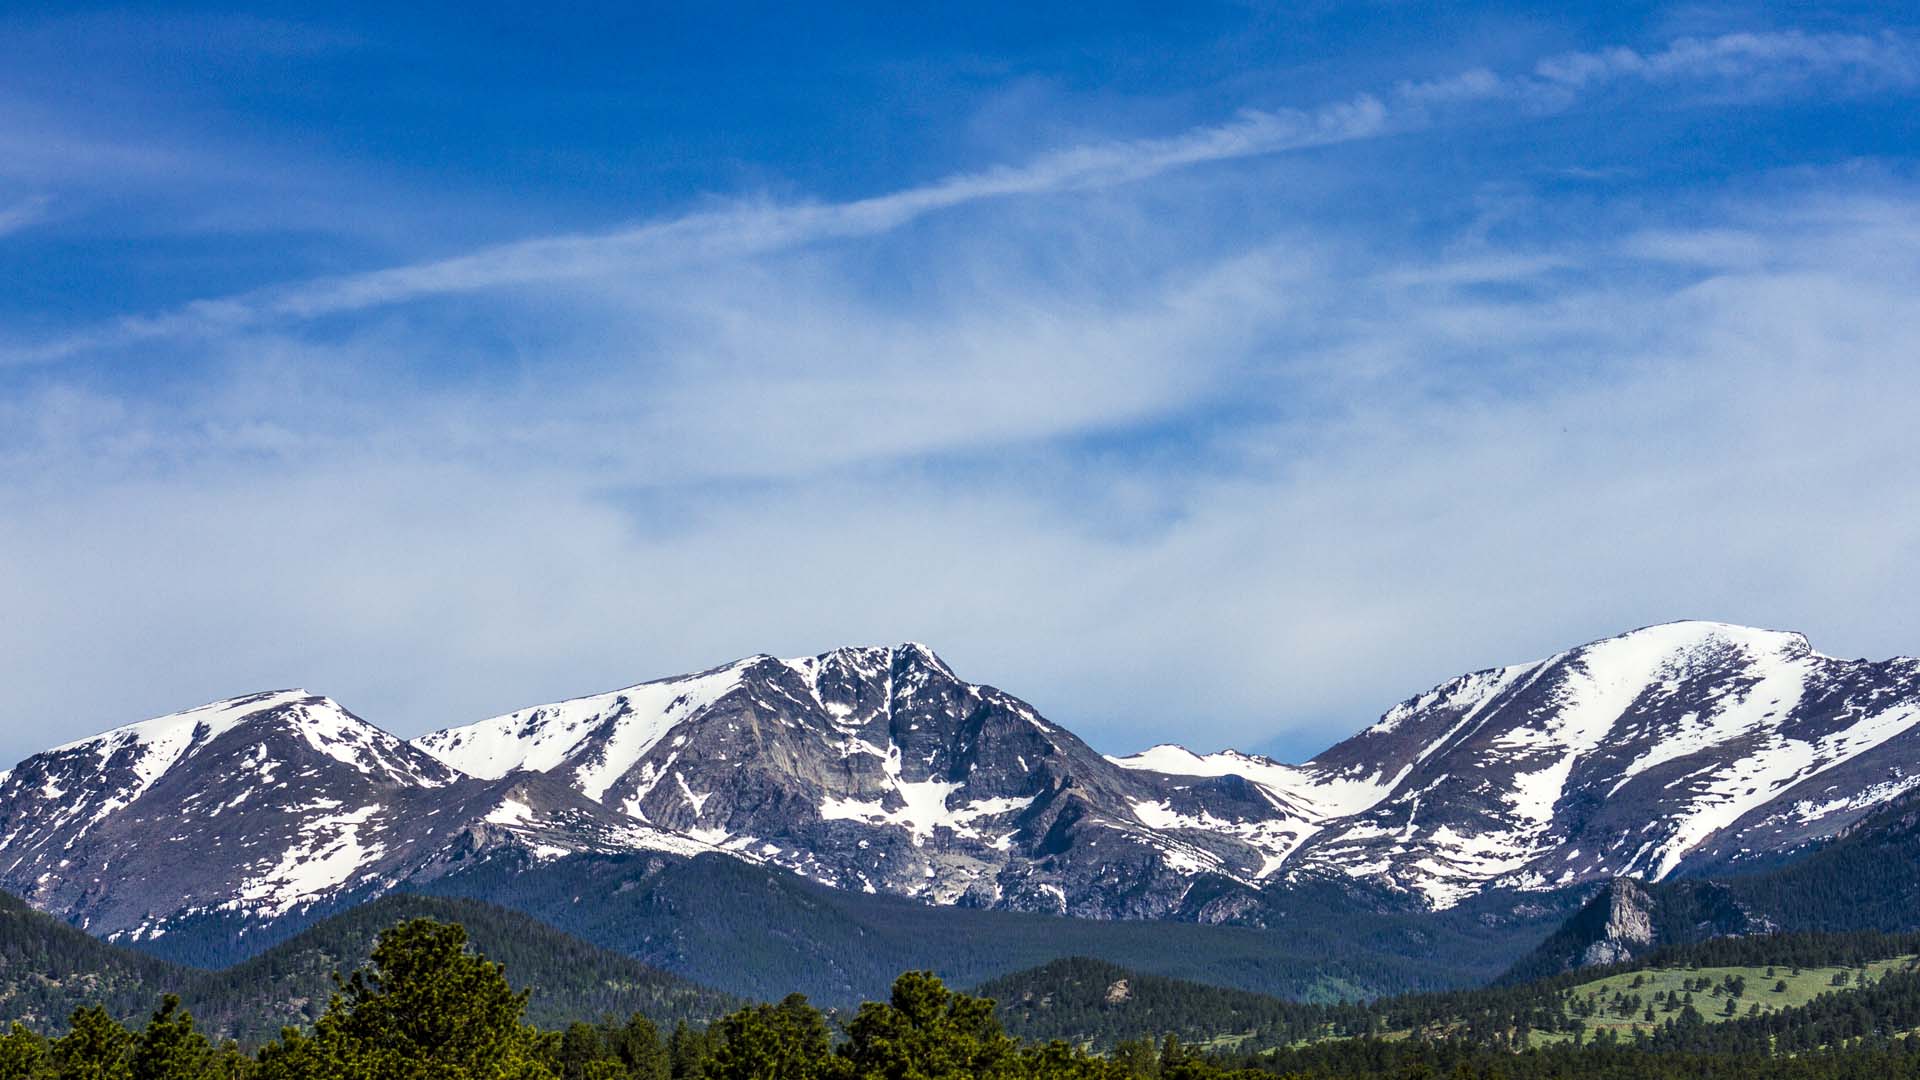 Landscape photo of snowy top mountains